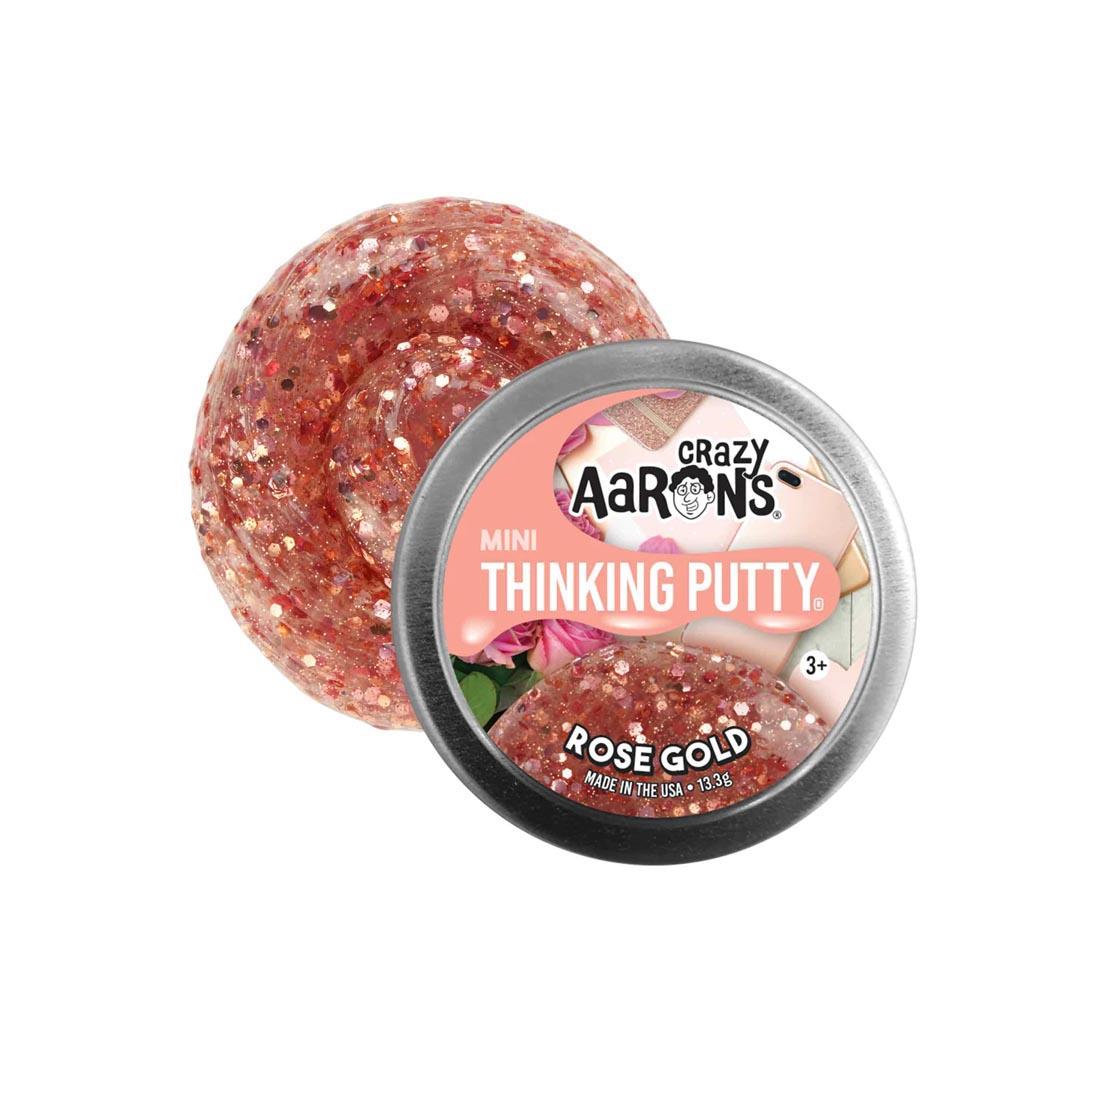 Rose Gold Mini Thinking Putty by Crazy Aaron